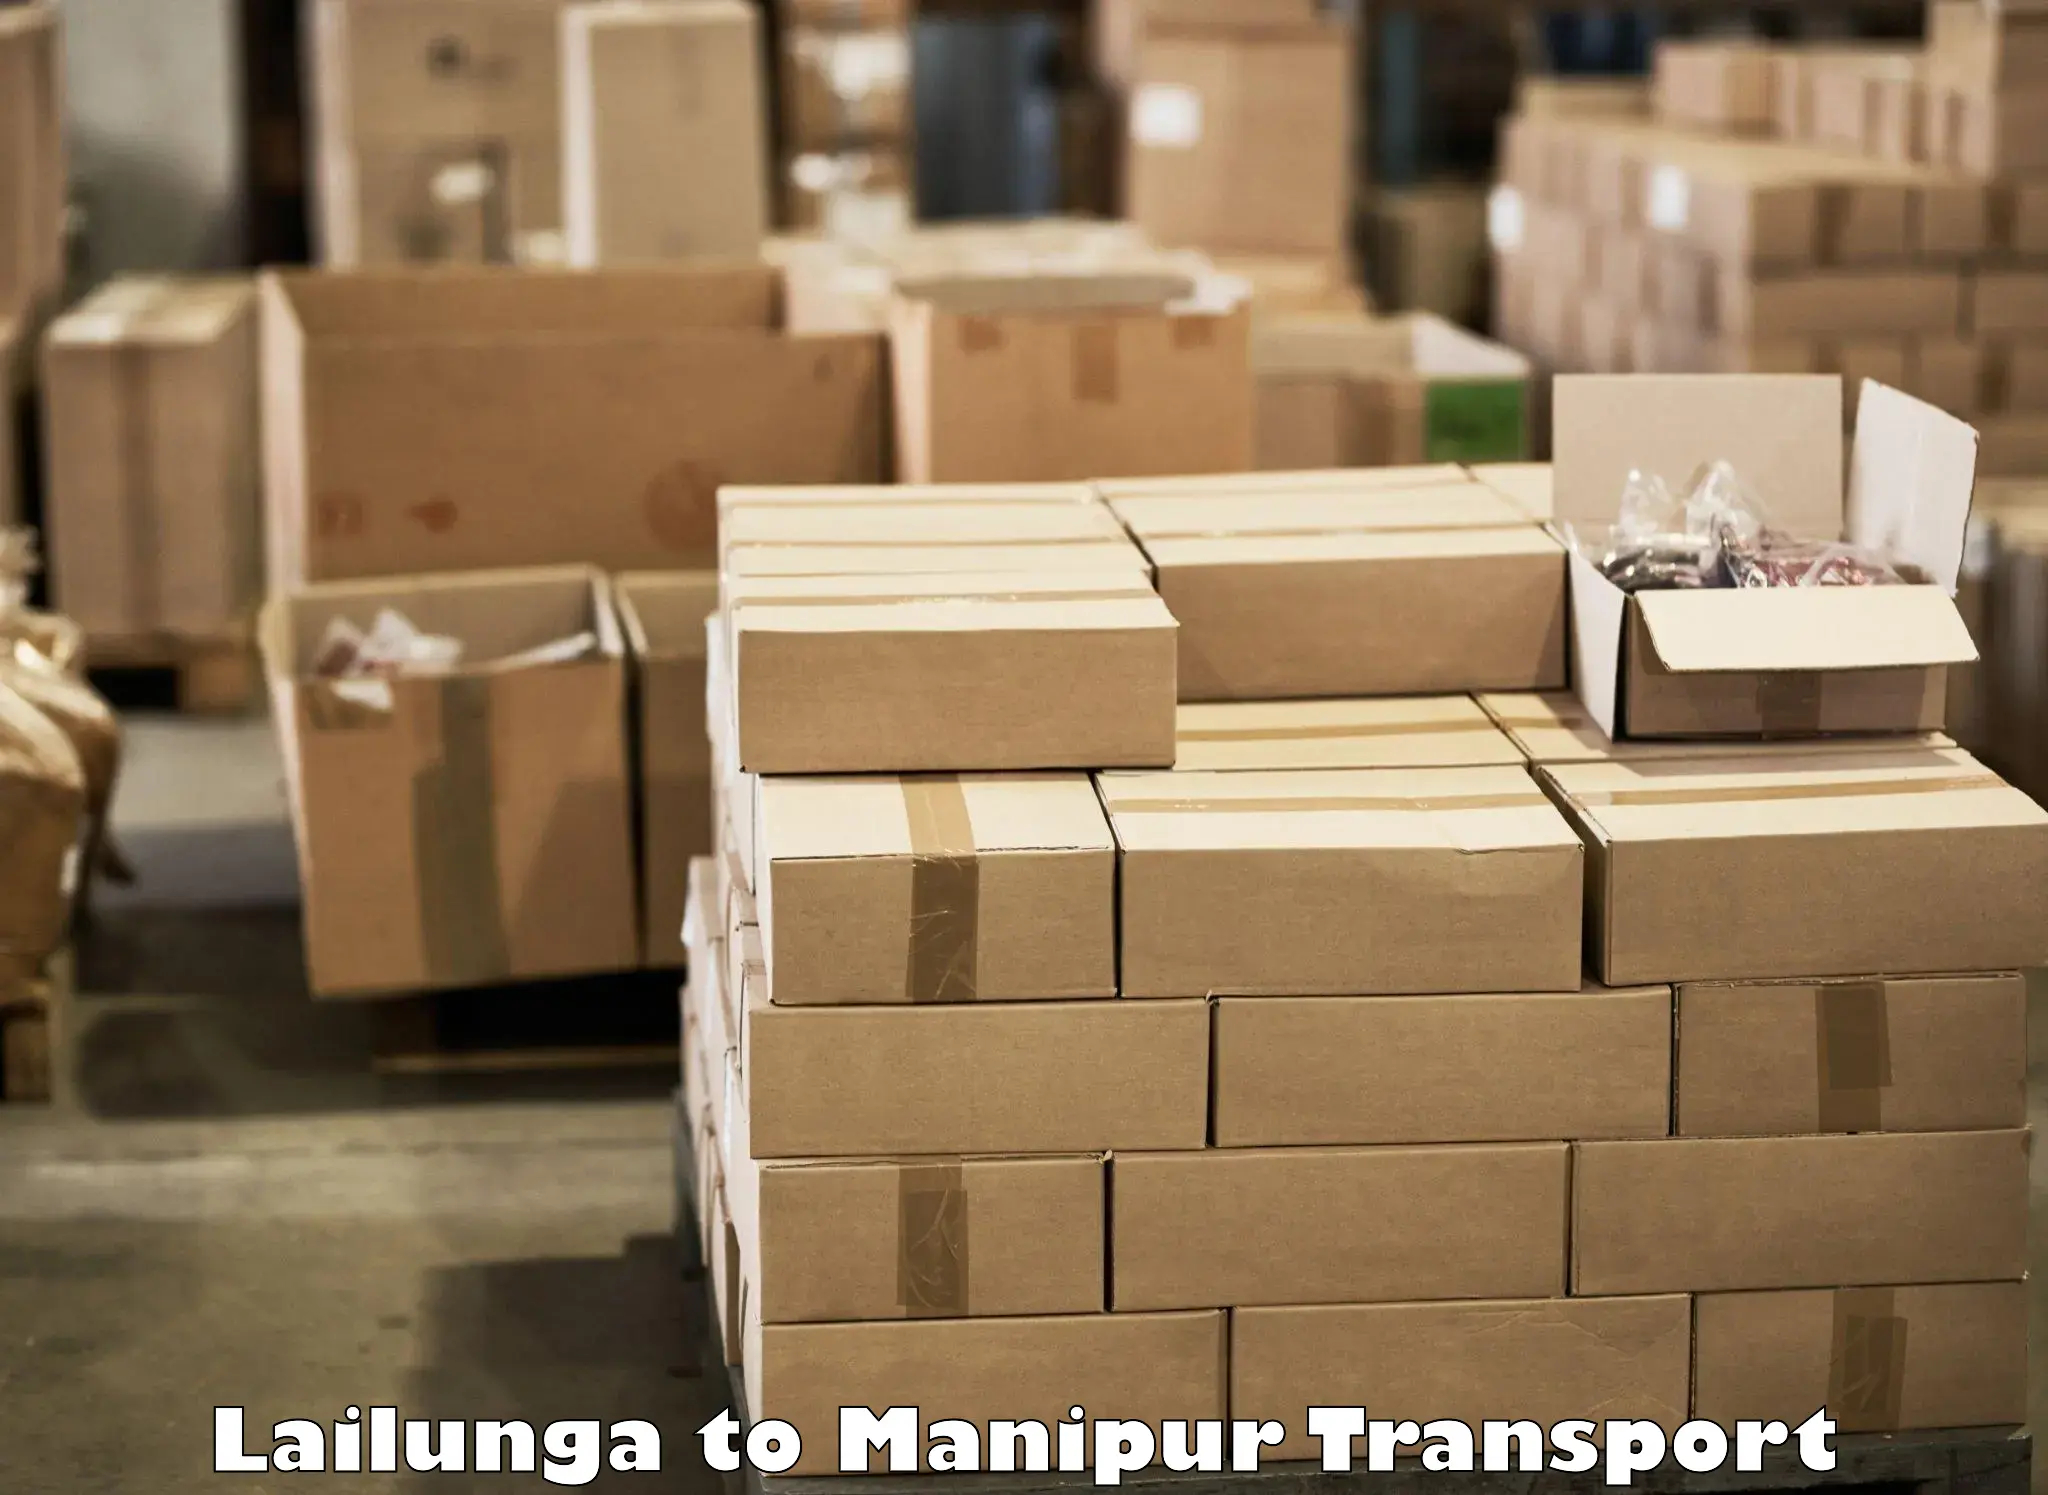 Luggage transport services Lailunga to Manipur